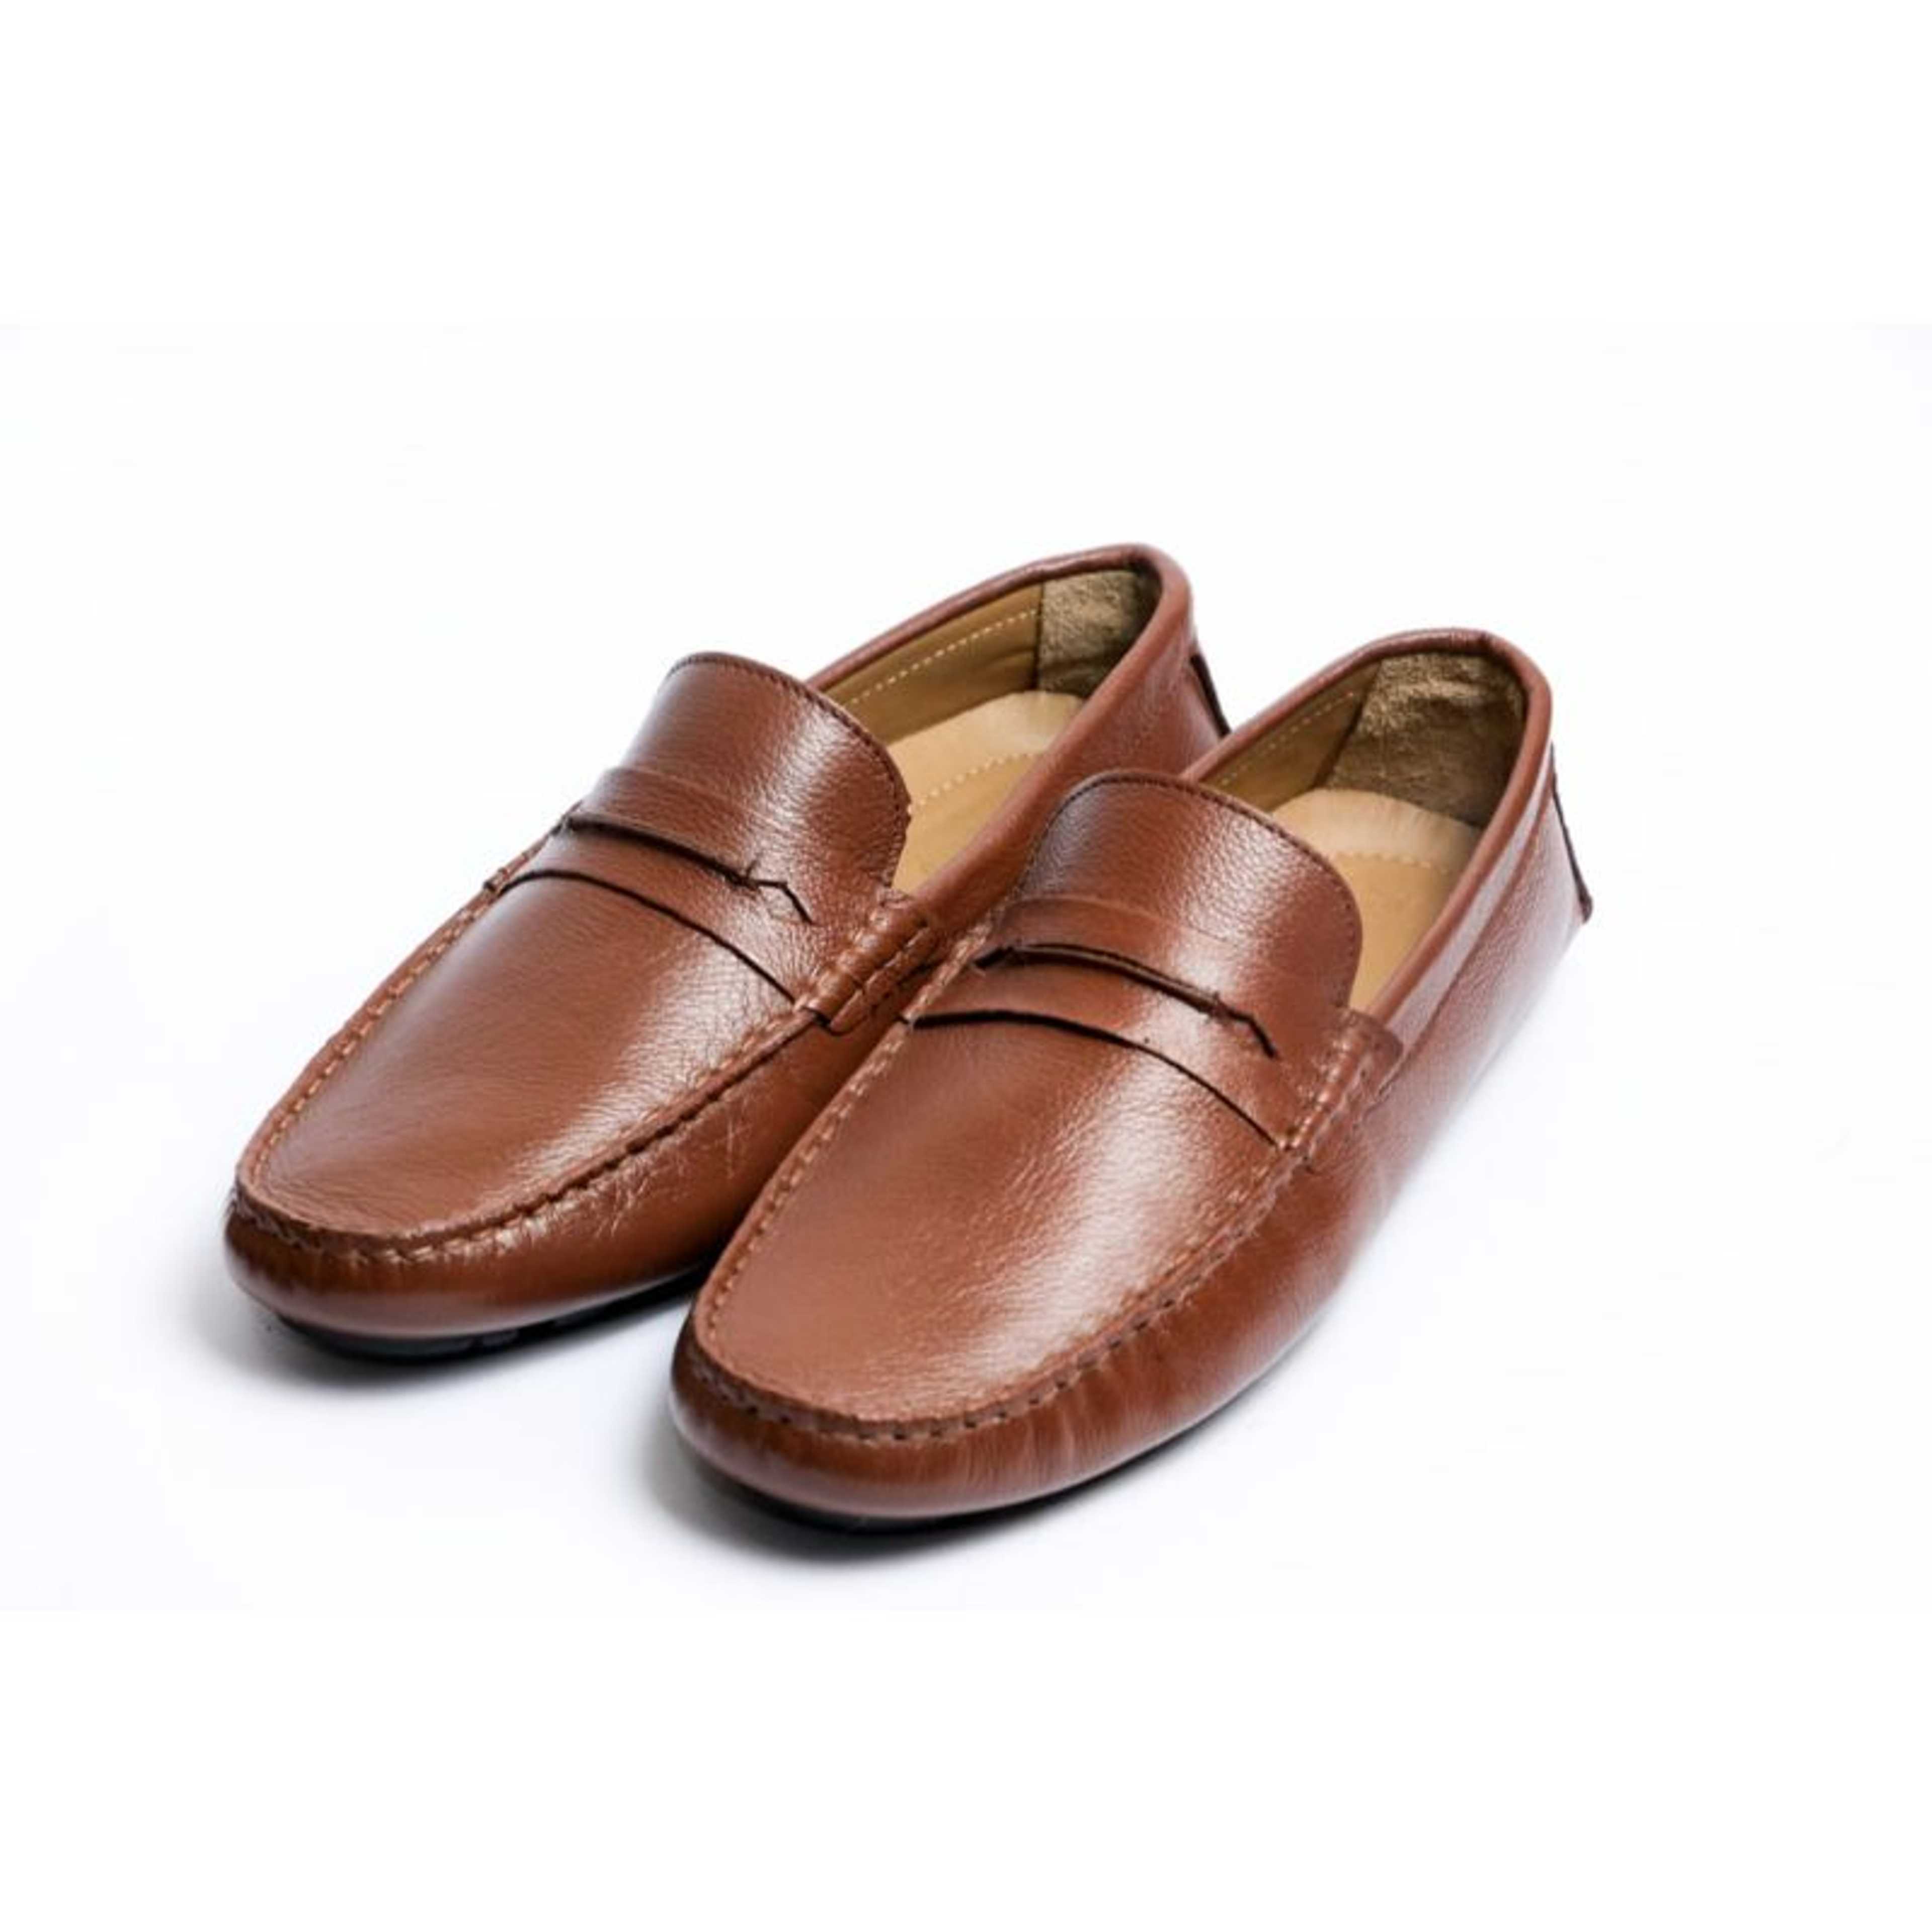 "Loafers Shoes Brown Color Uper Leather Sole Rubber"